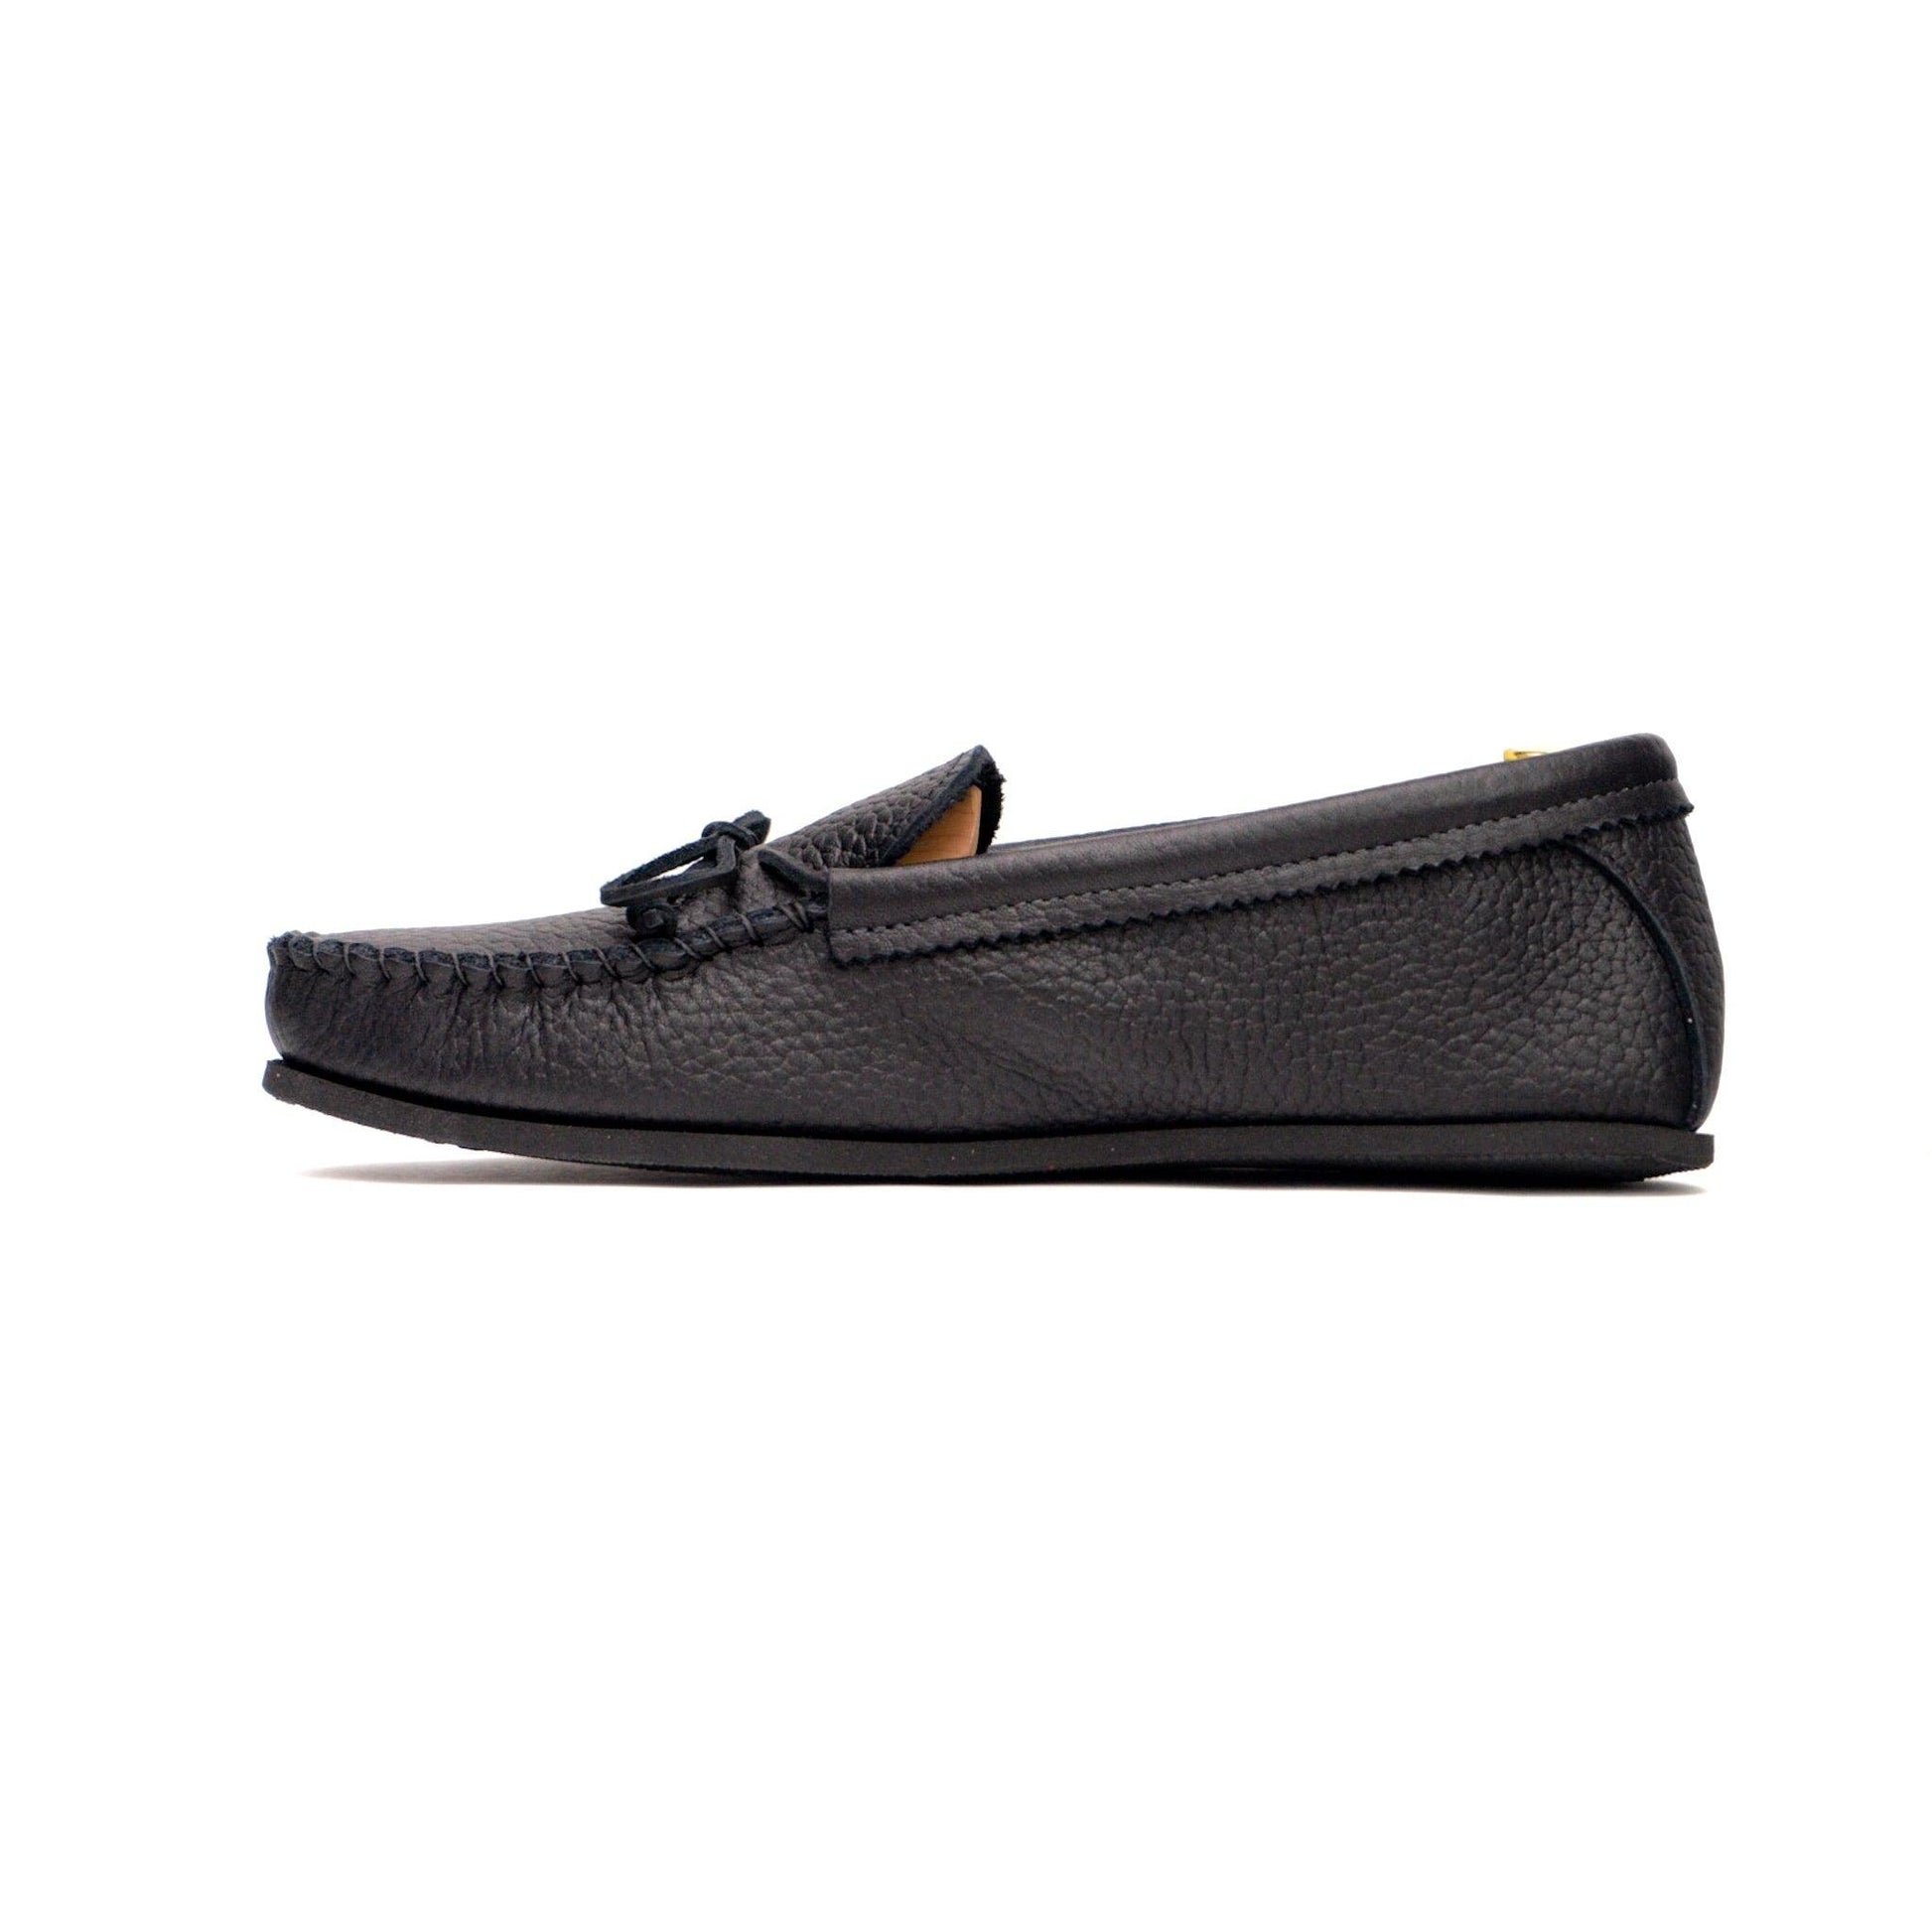 Spring Grove USA Moccasins - Black Cowhide - Kicks For Gents - Shoes - MADE IN USA, Sneaker